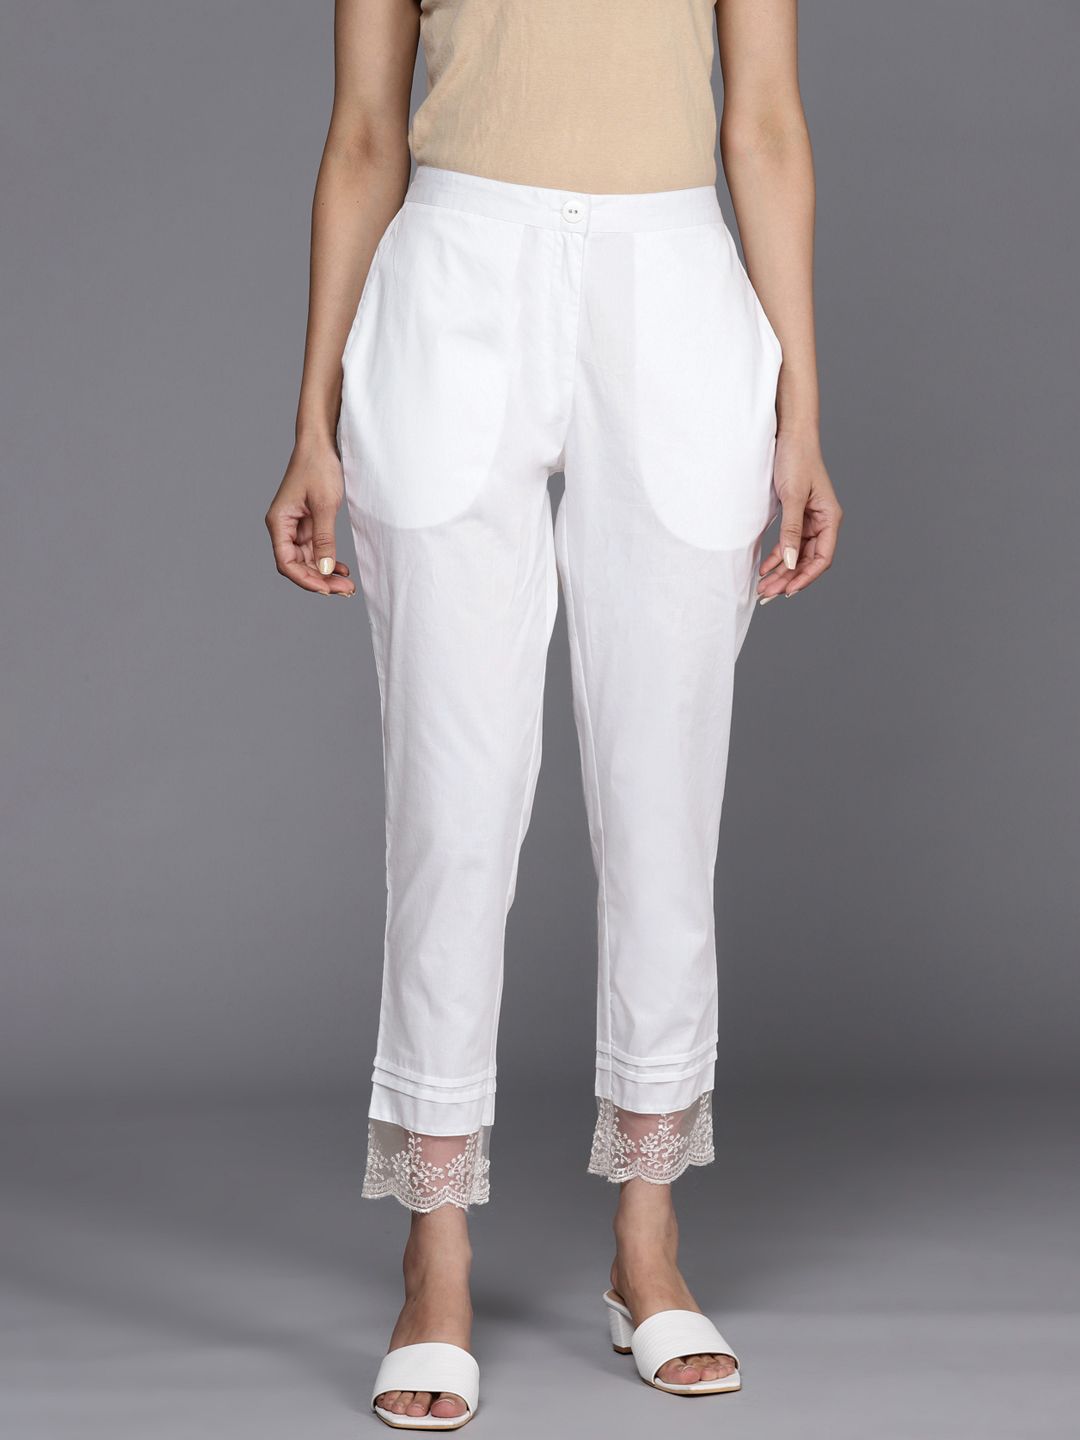 Libas Women Off White Solid Pure Cotton Trousers with Lace Inserts Detail Price in India